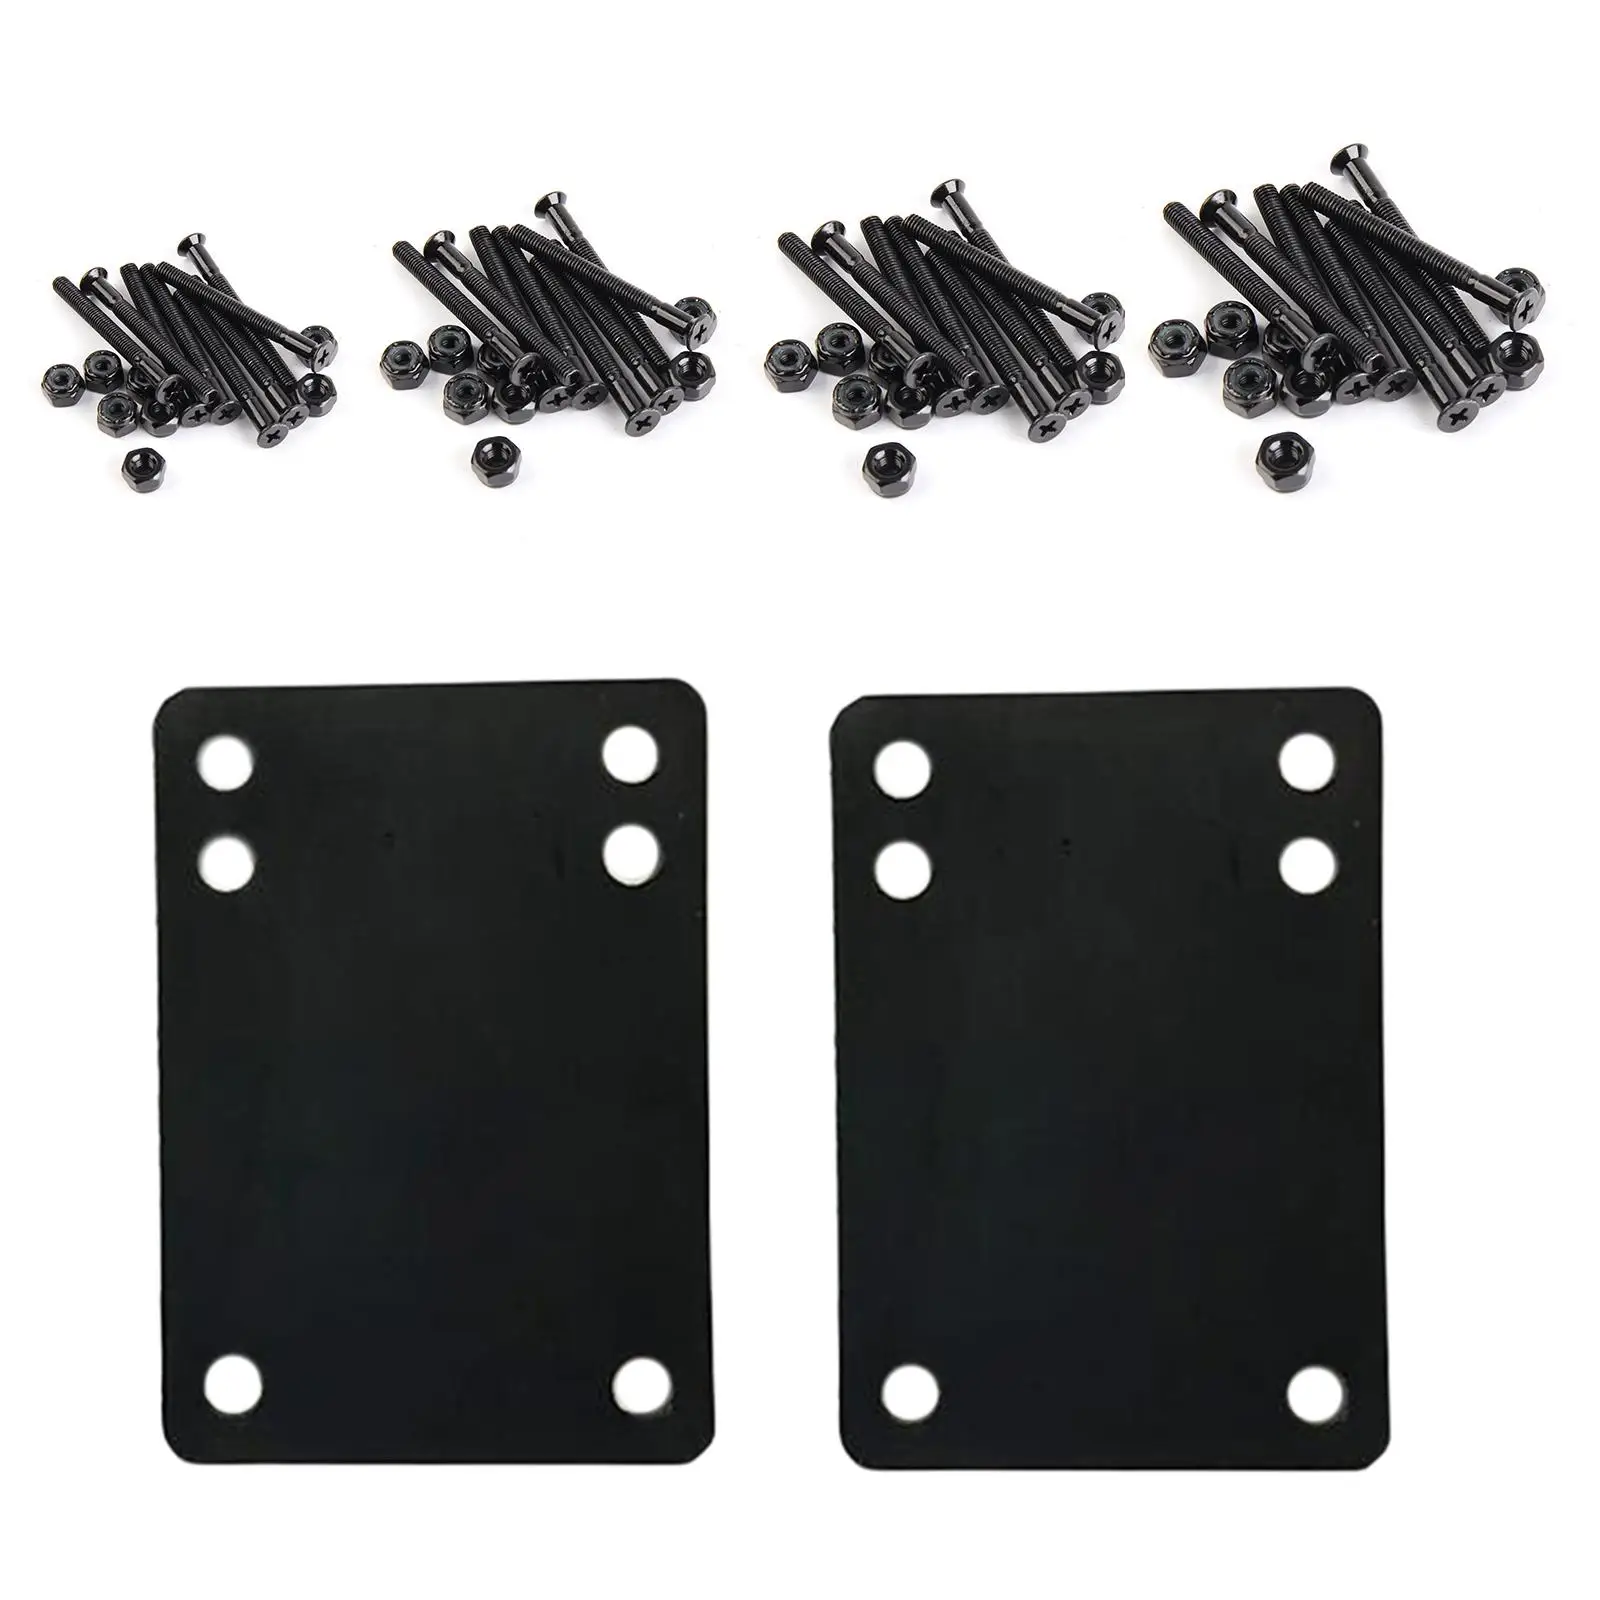 8x Deluxe Skateboard Truck Screws Deck Bolts Nuts Riser Shock Pads Rise Pad